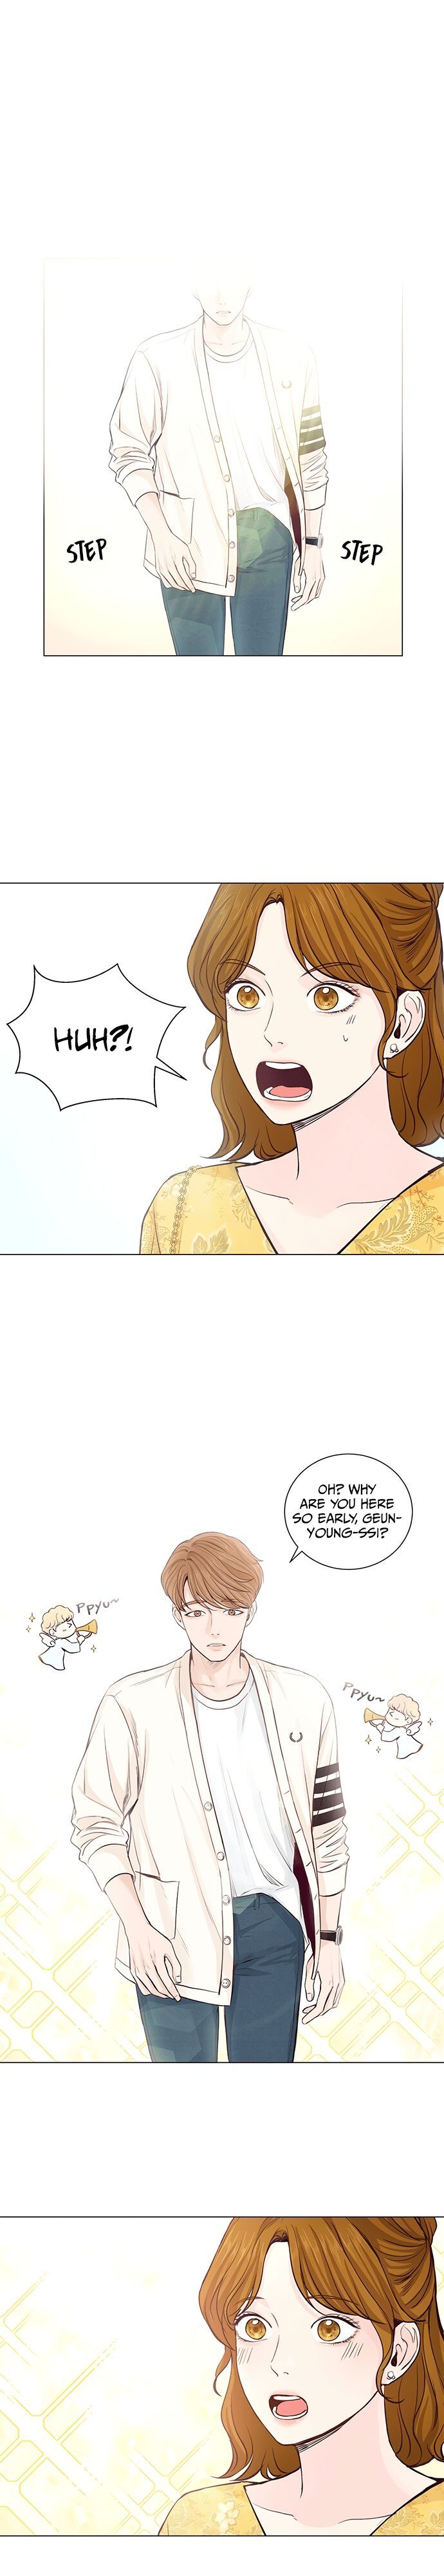 So I Married An Anti-Fan Chapter 036 page 1